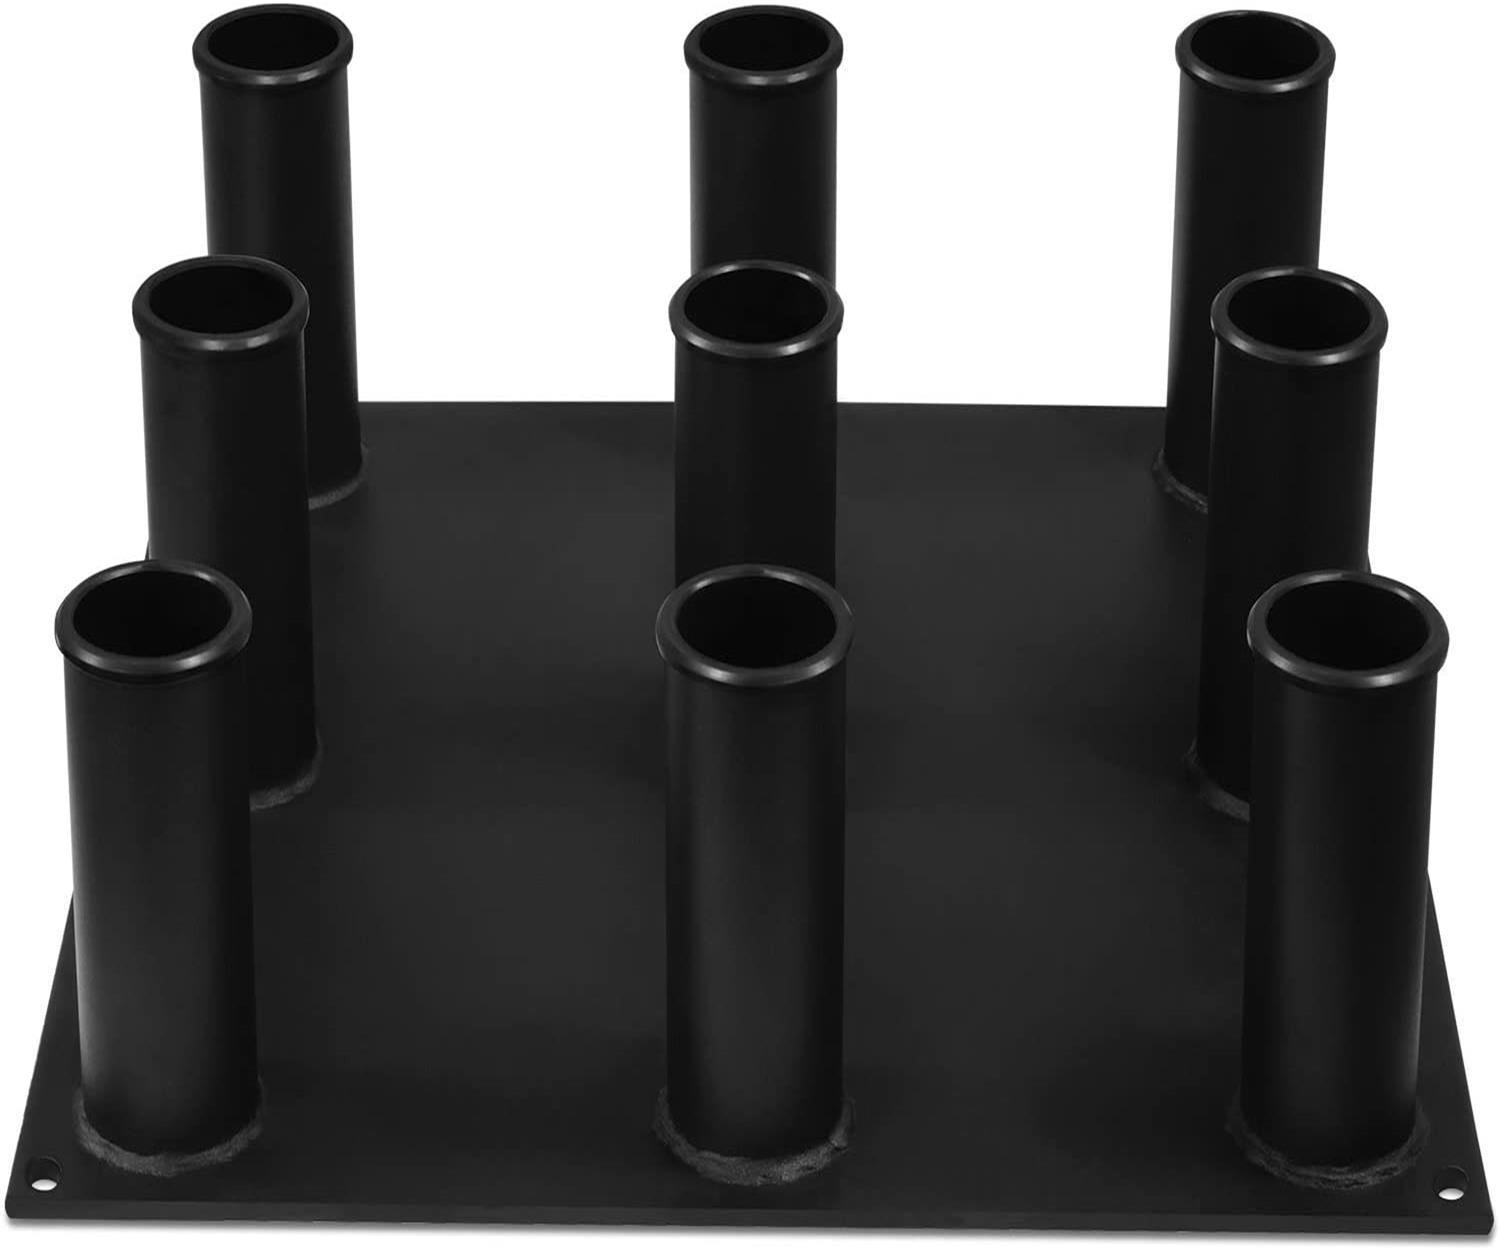 Hot-Sale-Gym-Fitness-5-6-9-Holes-Weightlifting-Barbell-Bar-Holder-Weight-Lifting-Bar-Storage-Holder